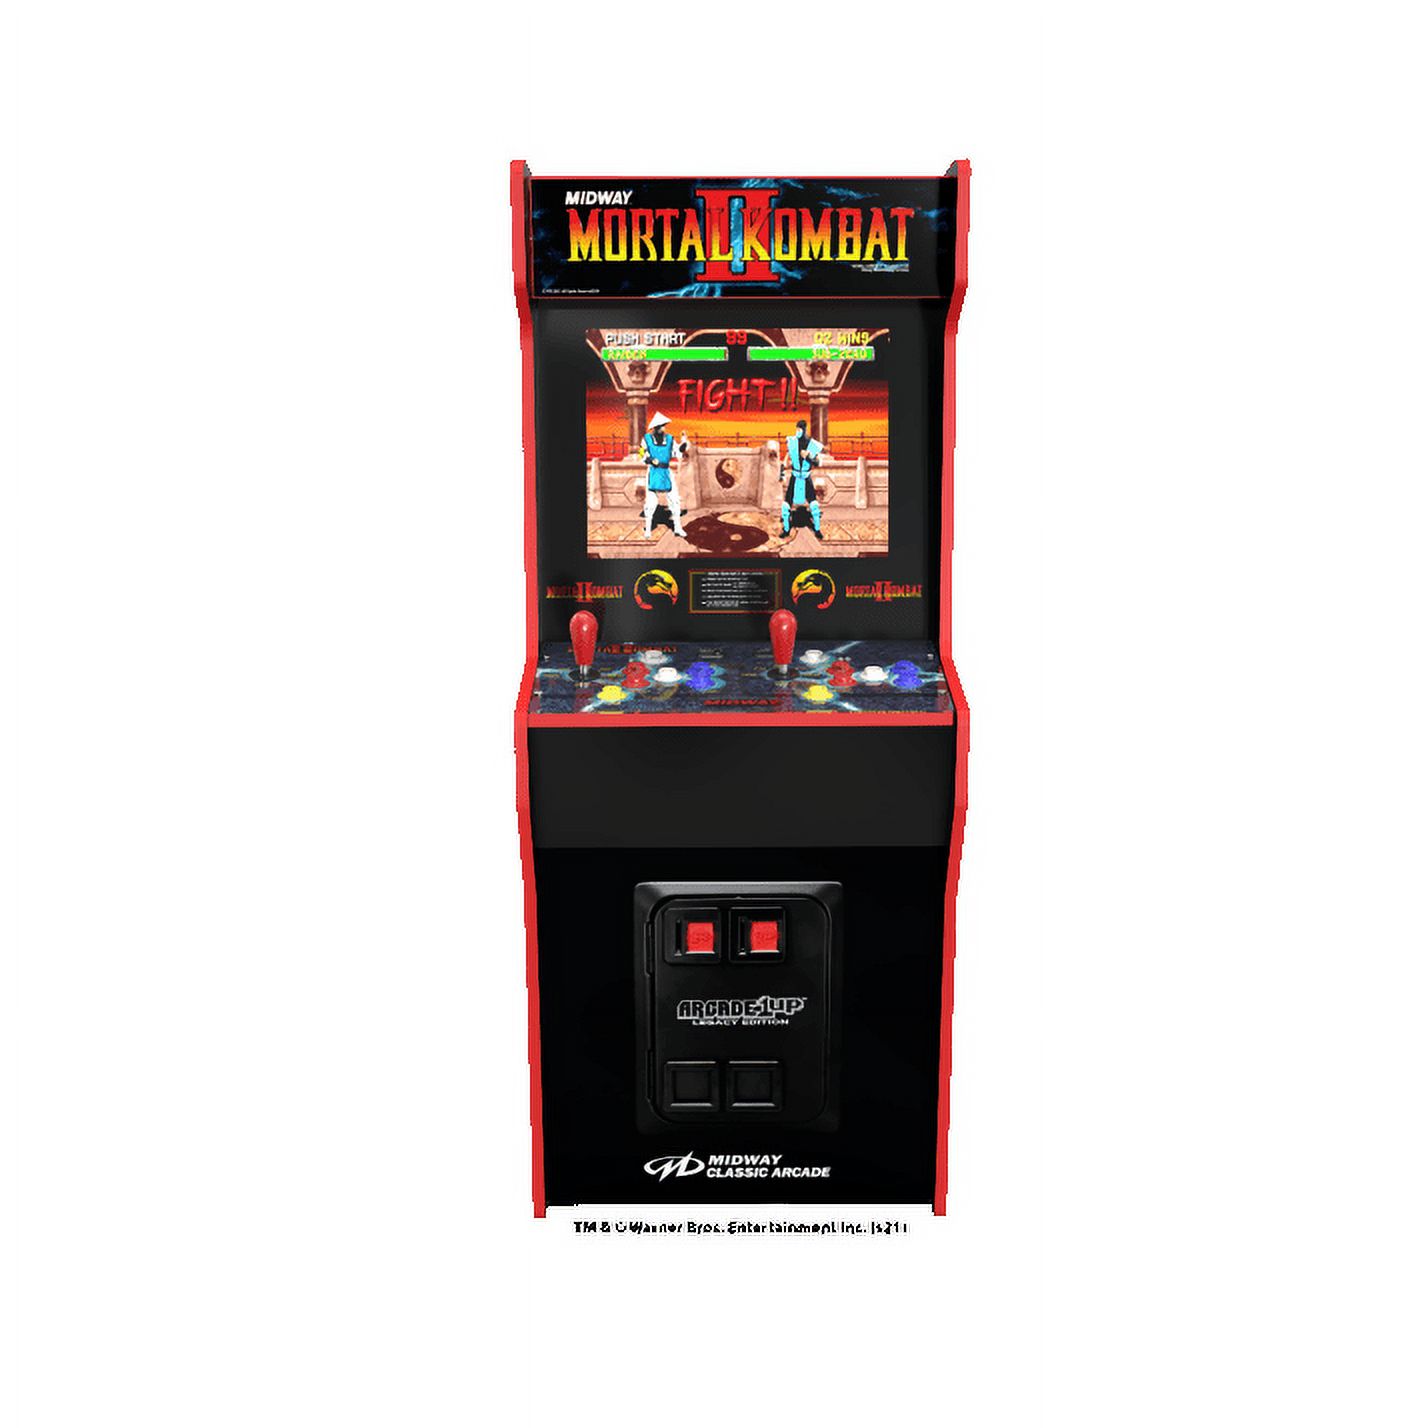 Arcade 1Up, Mortal Kombat Midway Legacy 12-in-1 without riser - image 1 of 8